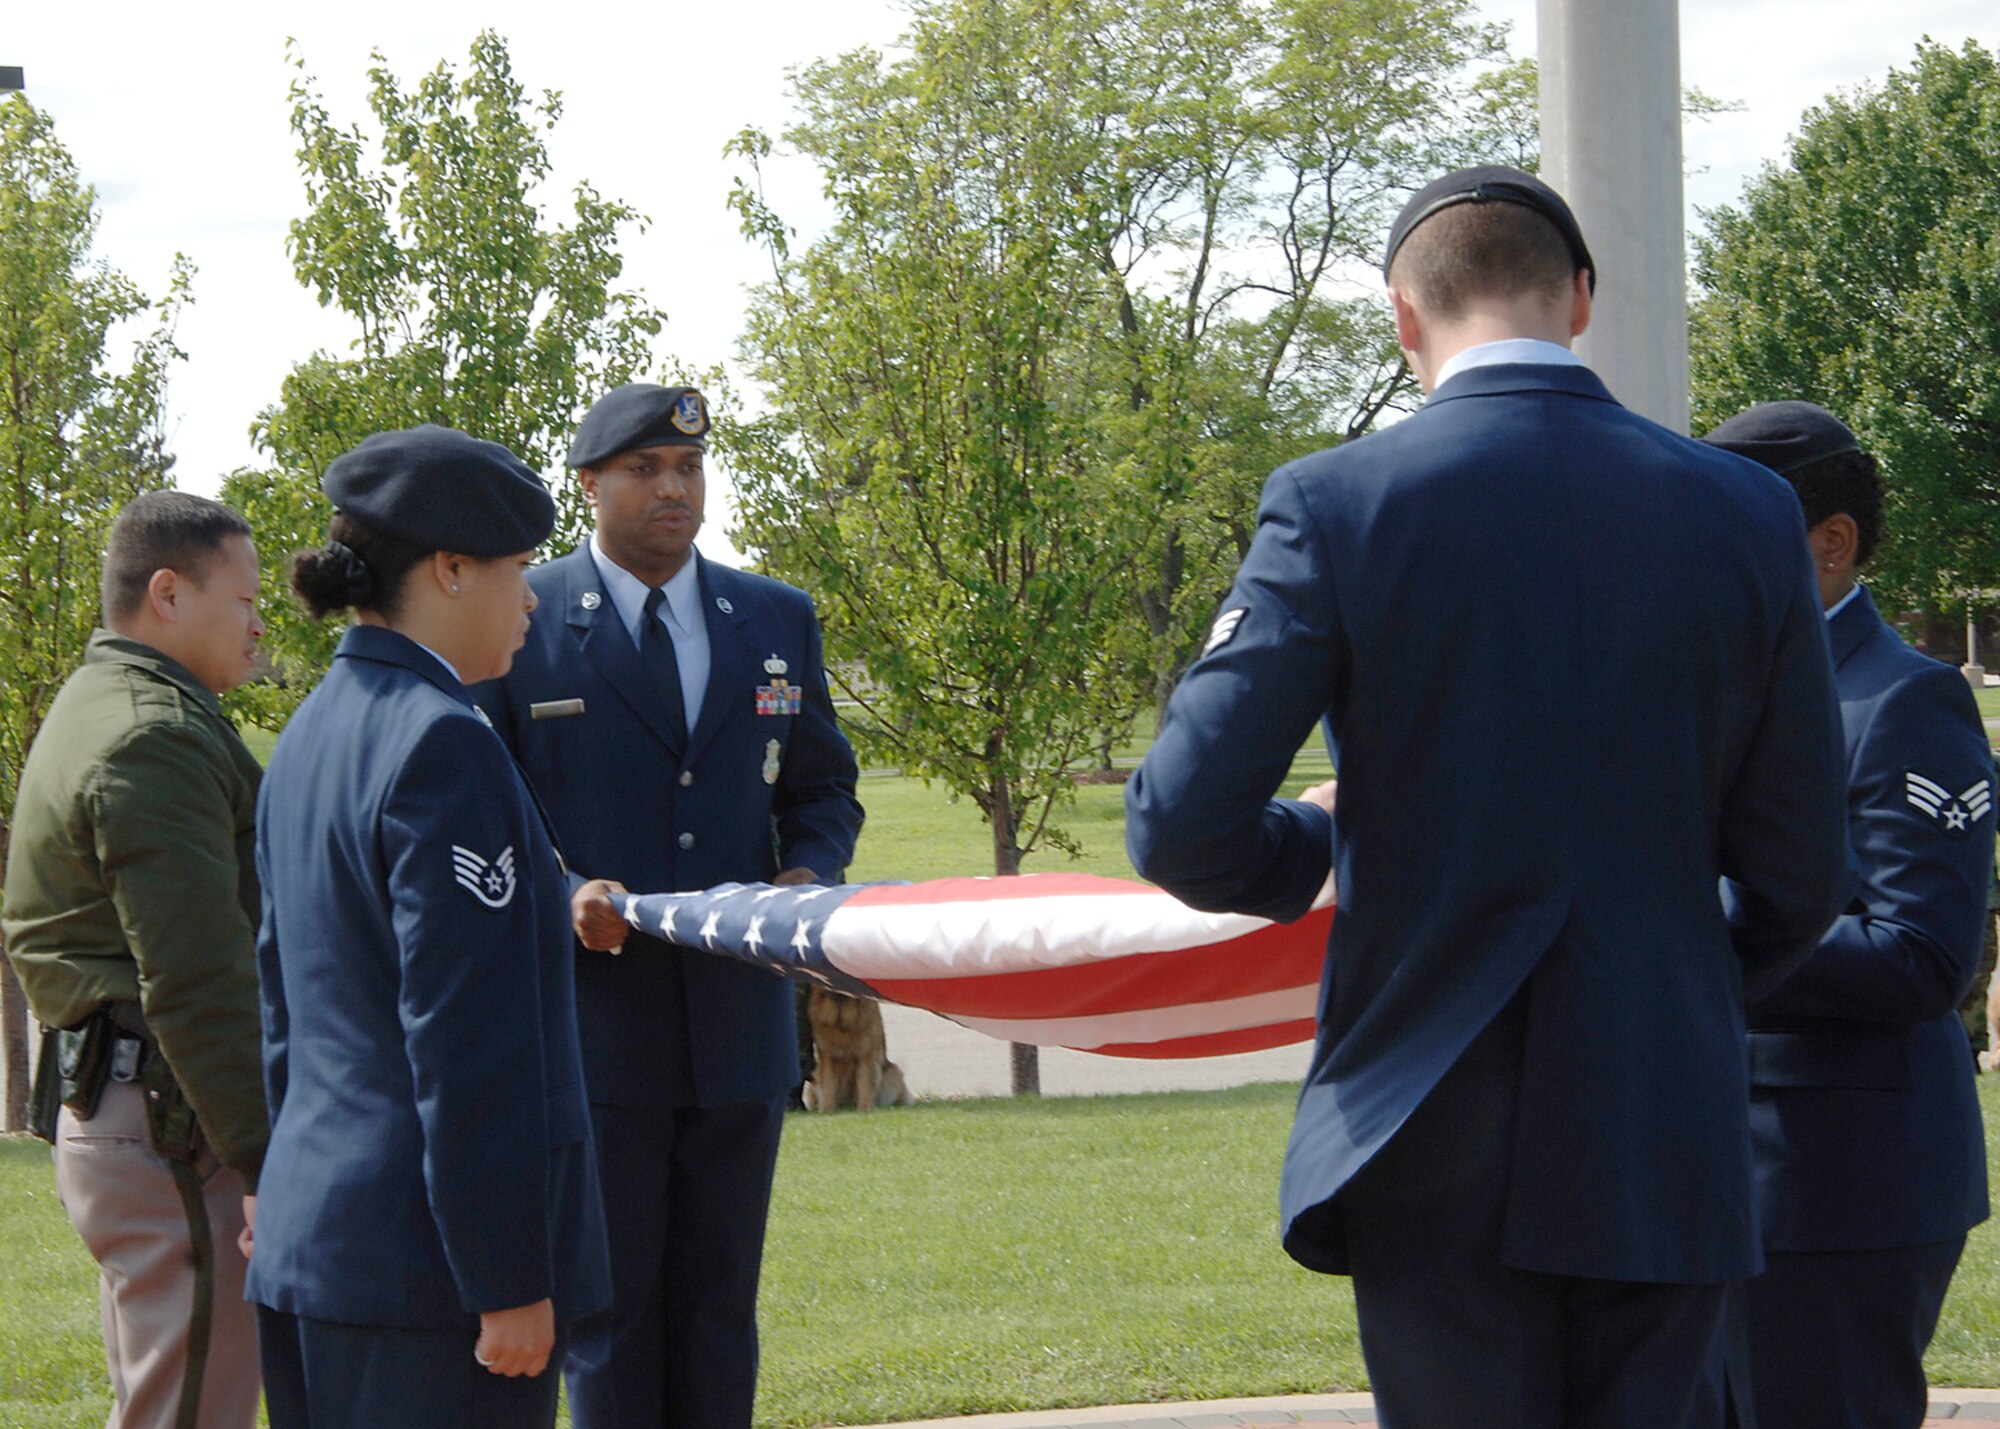 Members of the 22nd Security Forces Squadron and a Wichita police officer fold the flag during a retreat ceremony in front of Bldg. 1 May 15. The ceremony commemorates the loss of two Security Forces members and two police officers in the local community in the past year. May 15 marked the beginning of National Police Week. (Photo by Airman Justin Shelton)